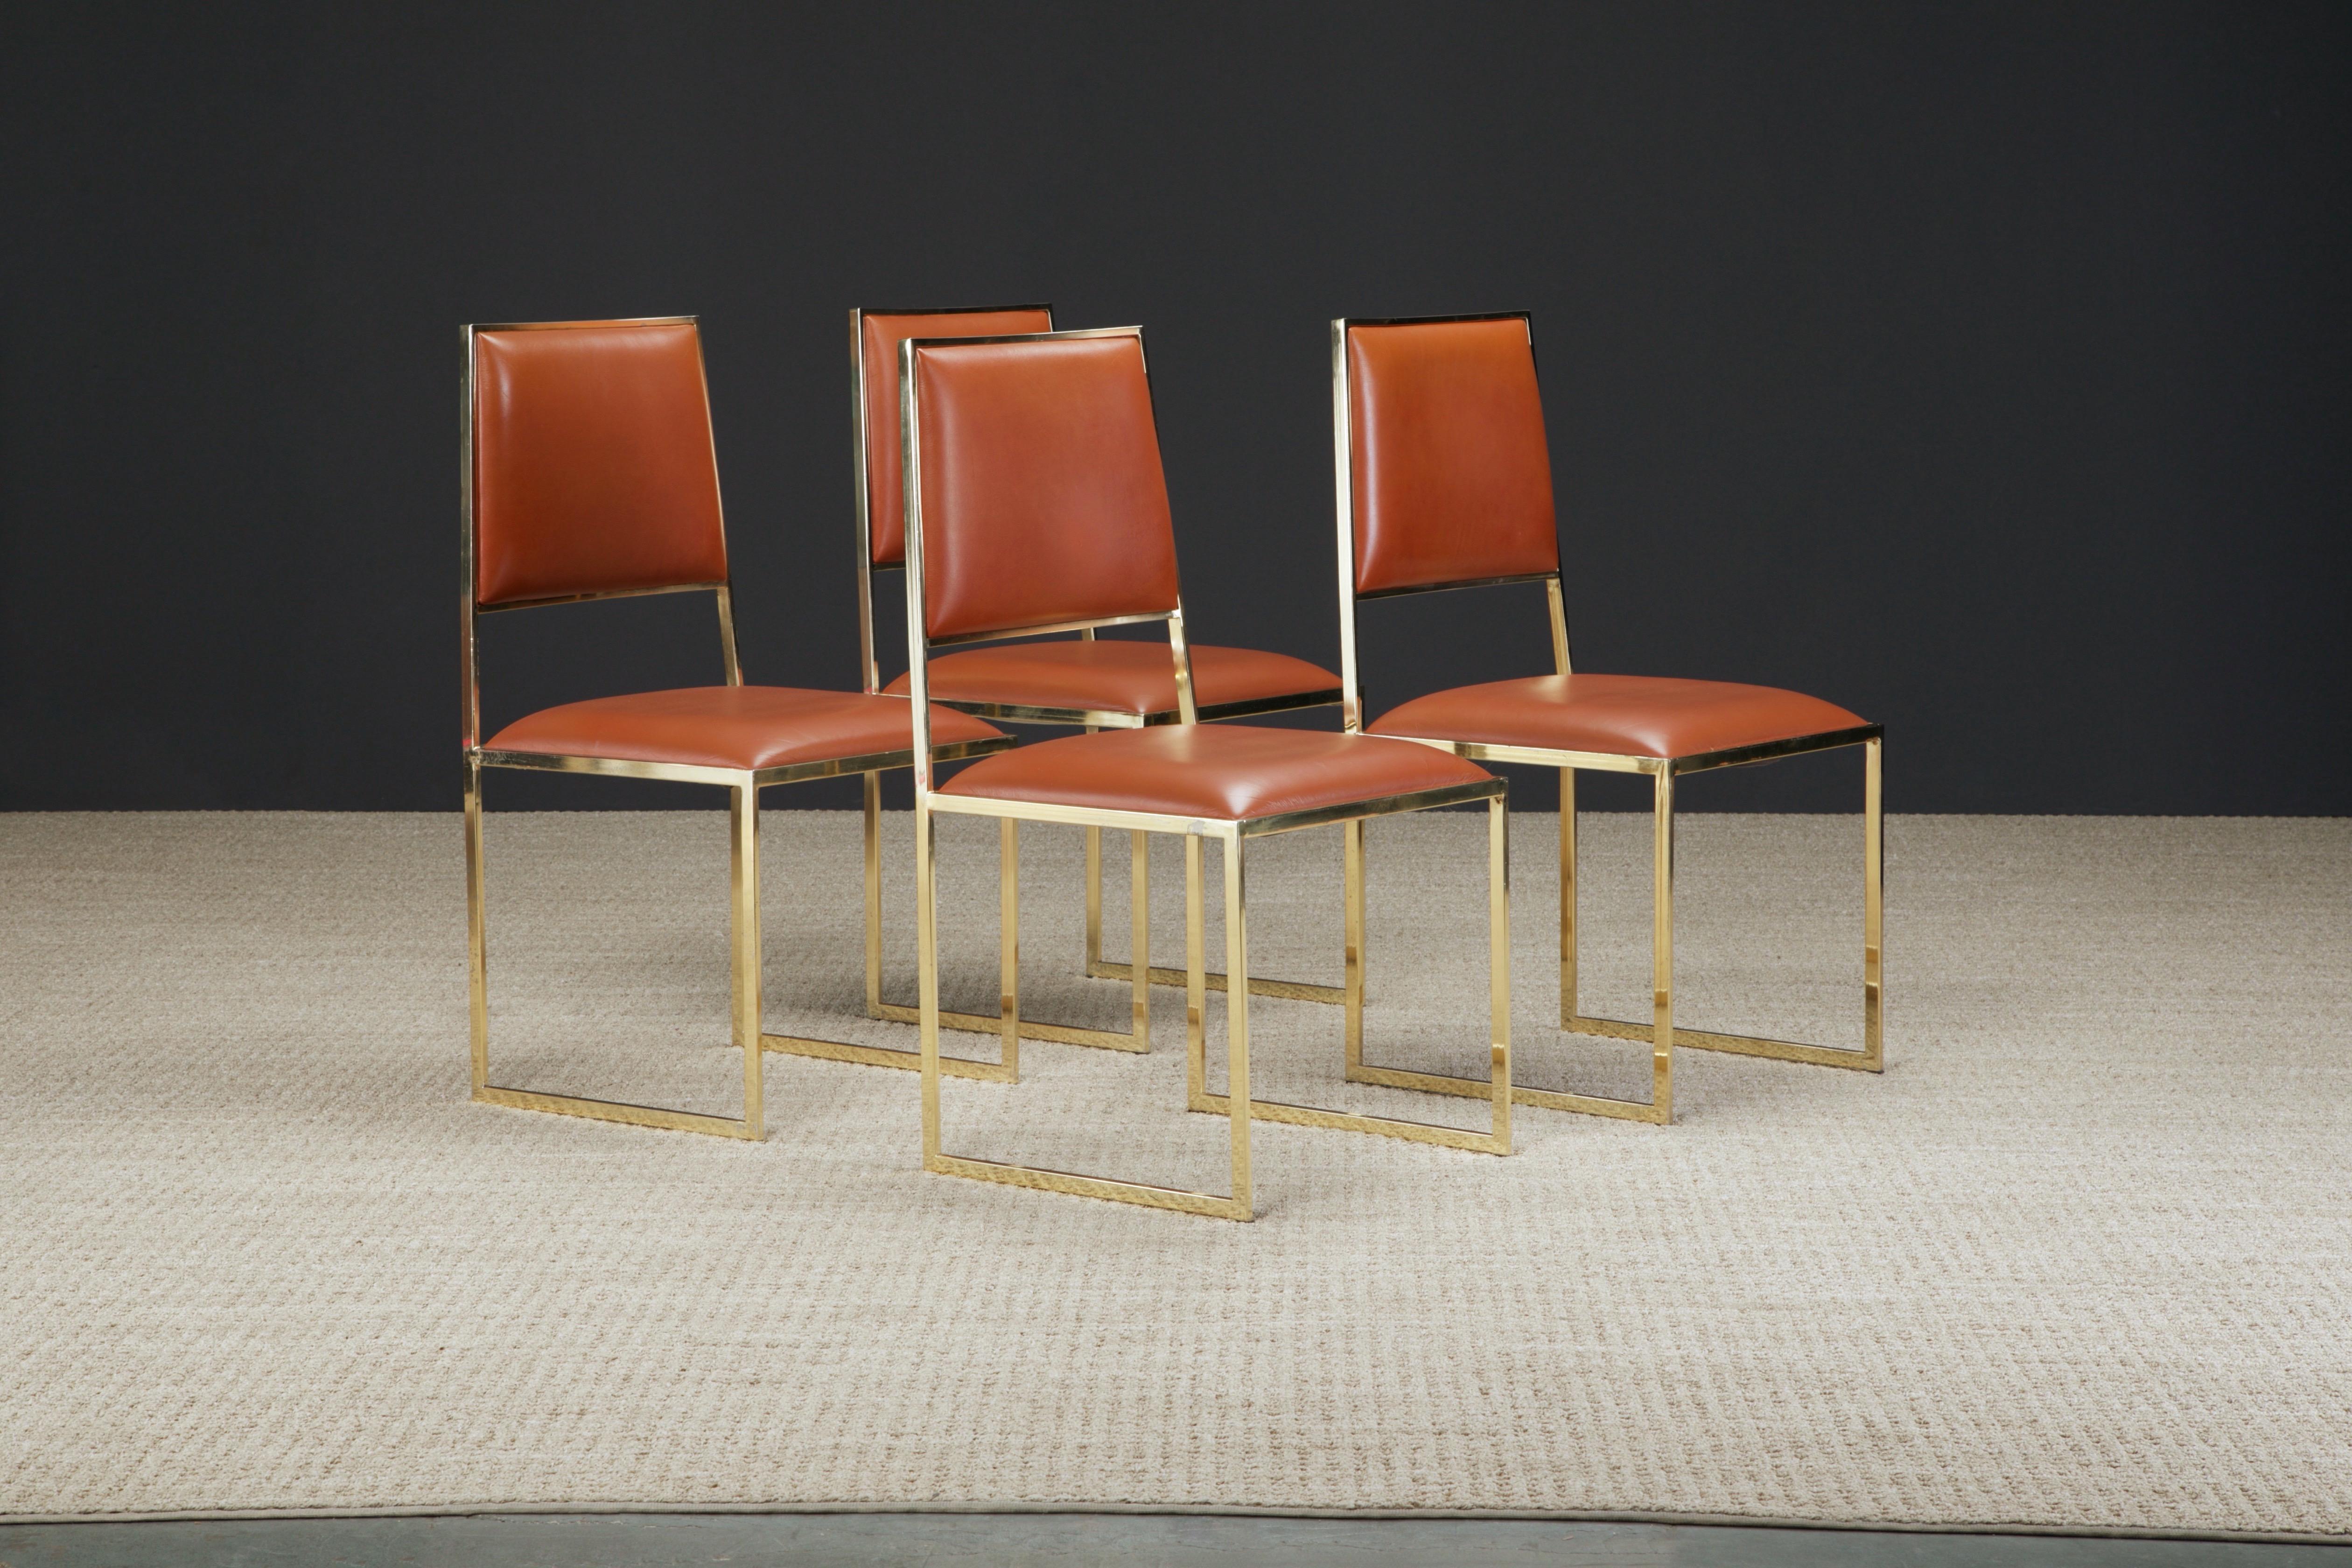 A beautiful set of four (4) dining chairs by Willy Rizzo for Cidue, Italy circa 1970, featuring gorgeous cubist brass frames and cognac colored leather. Signed with Cidue labels reading 'Made in Italy, Cidue, elementi d'arredo - carrè / vi'.